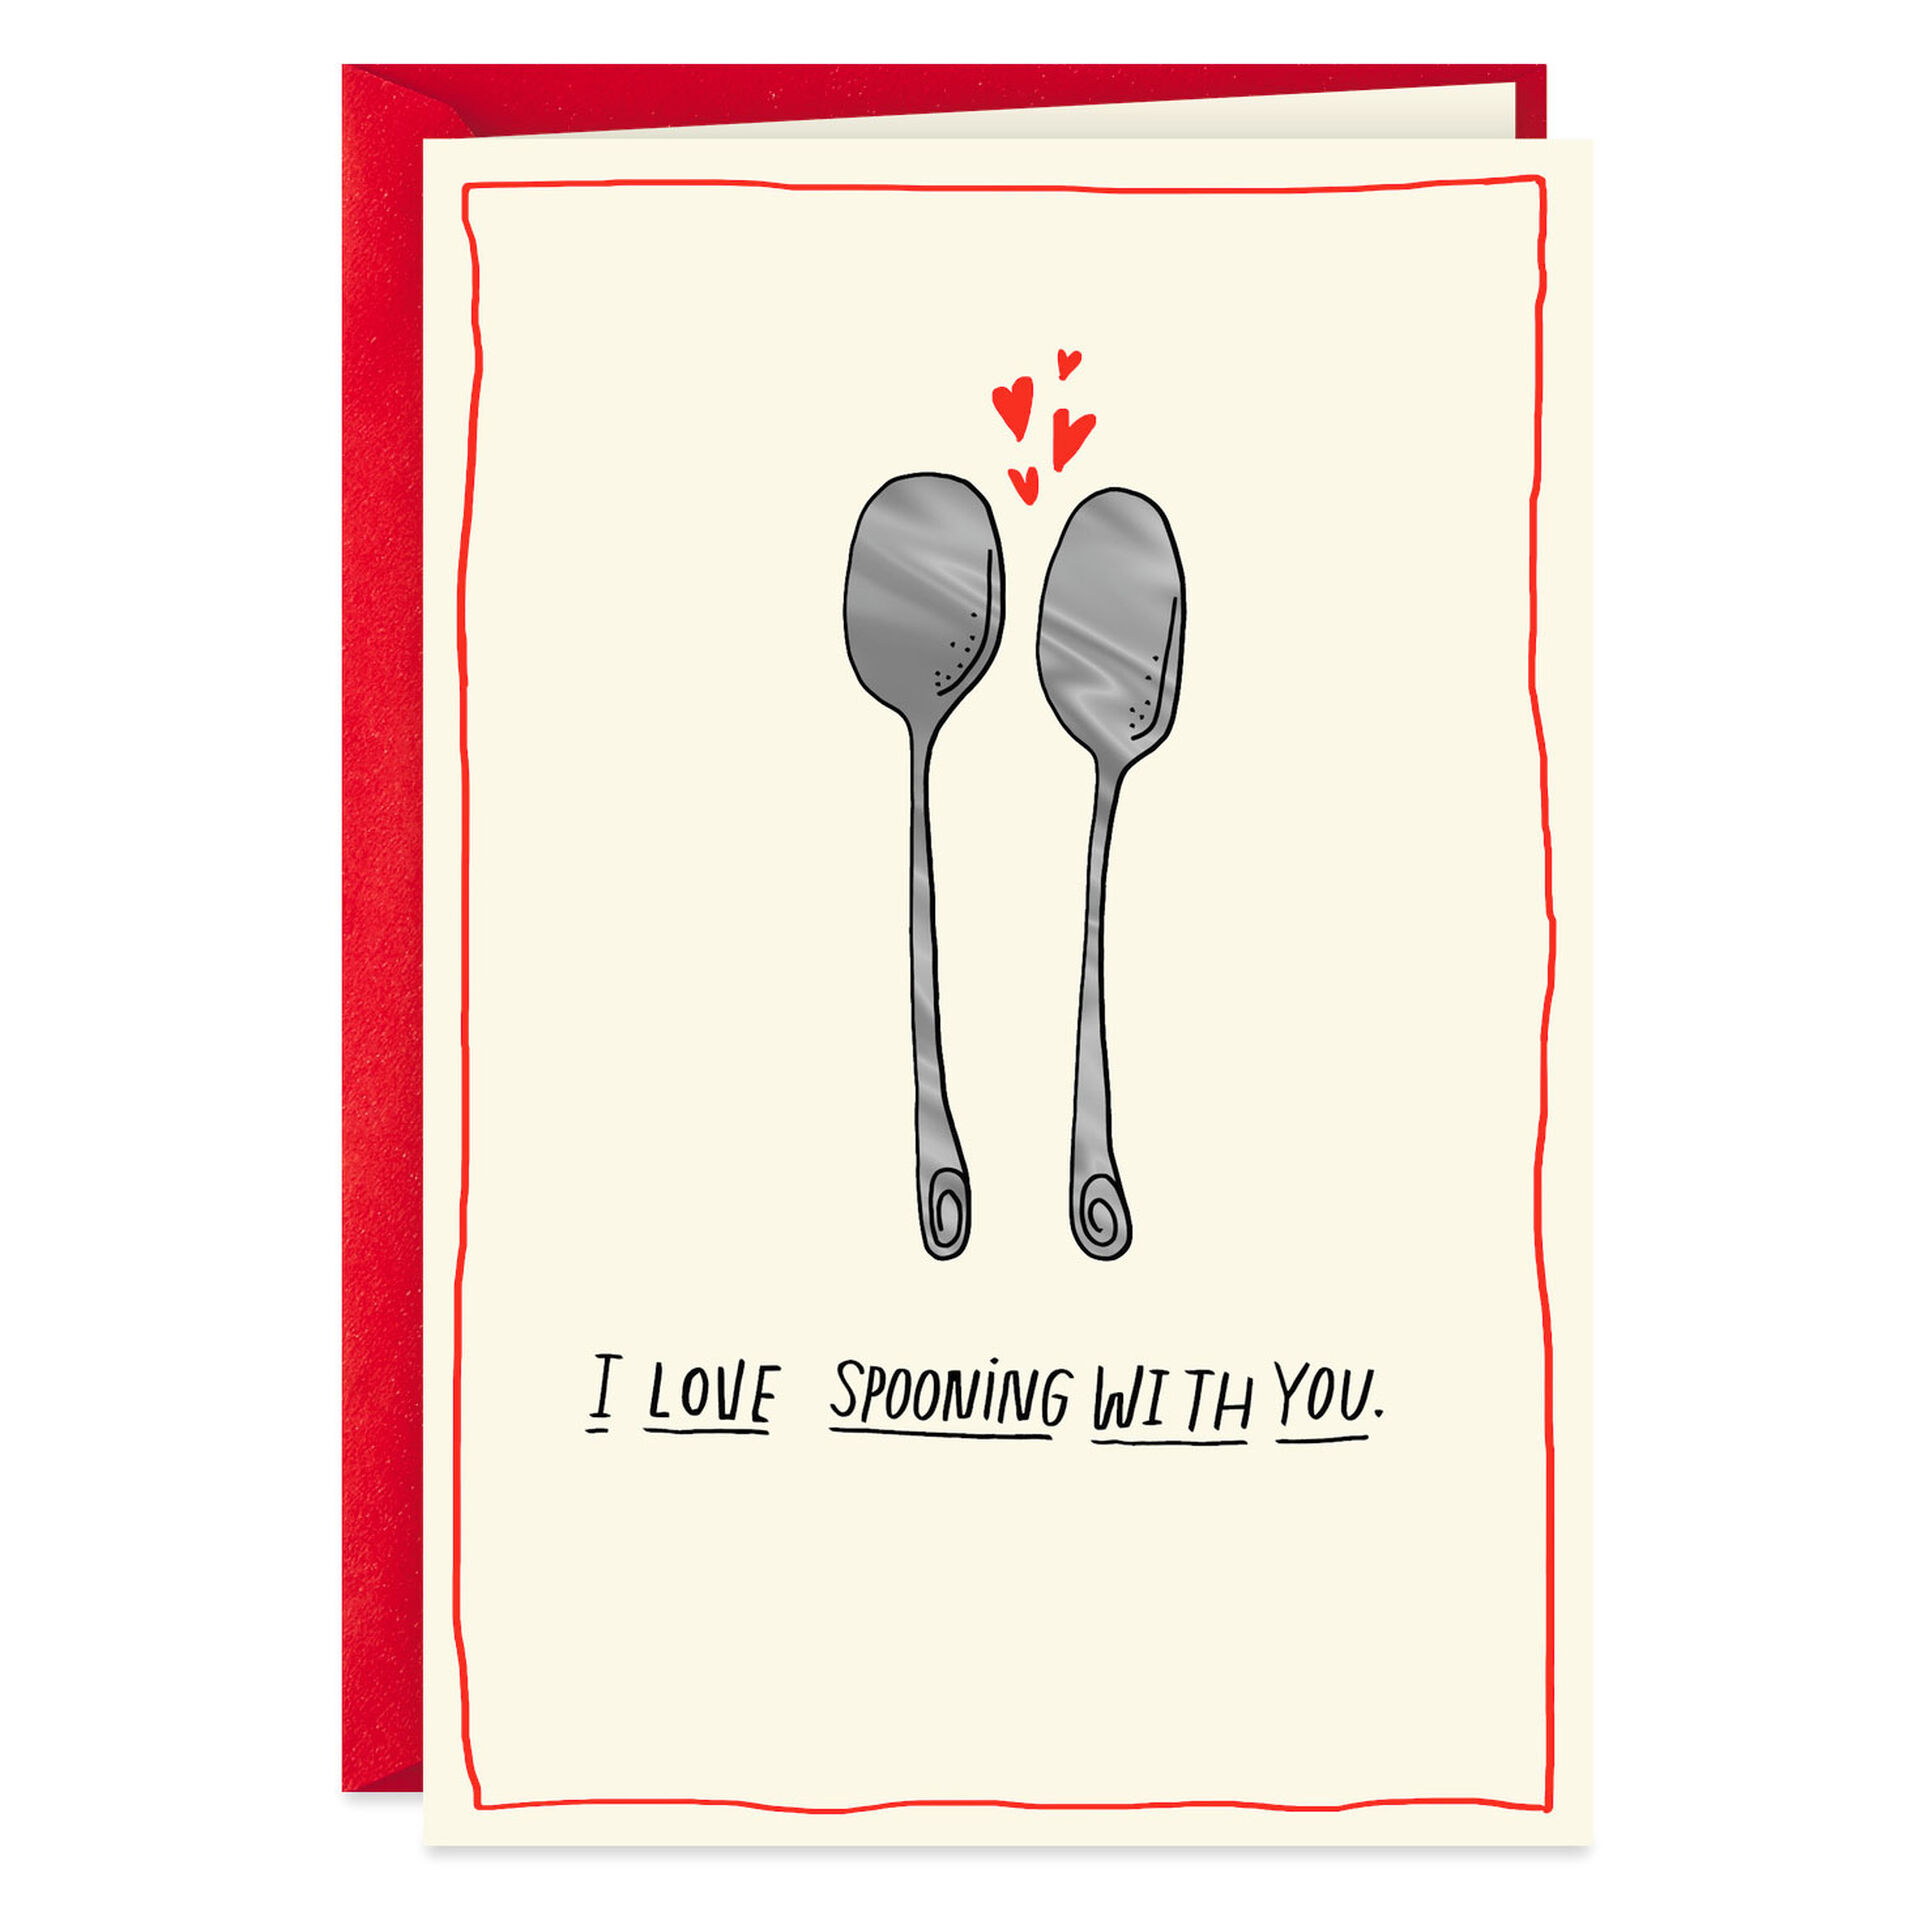 Spooning And Forking Romantic Sweetest Day Card Greeting Cards Hallmark 